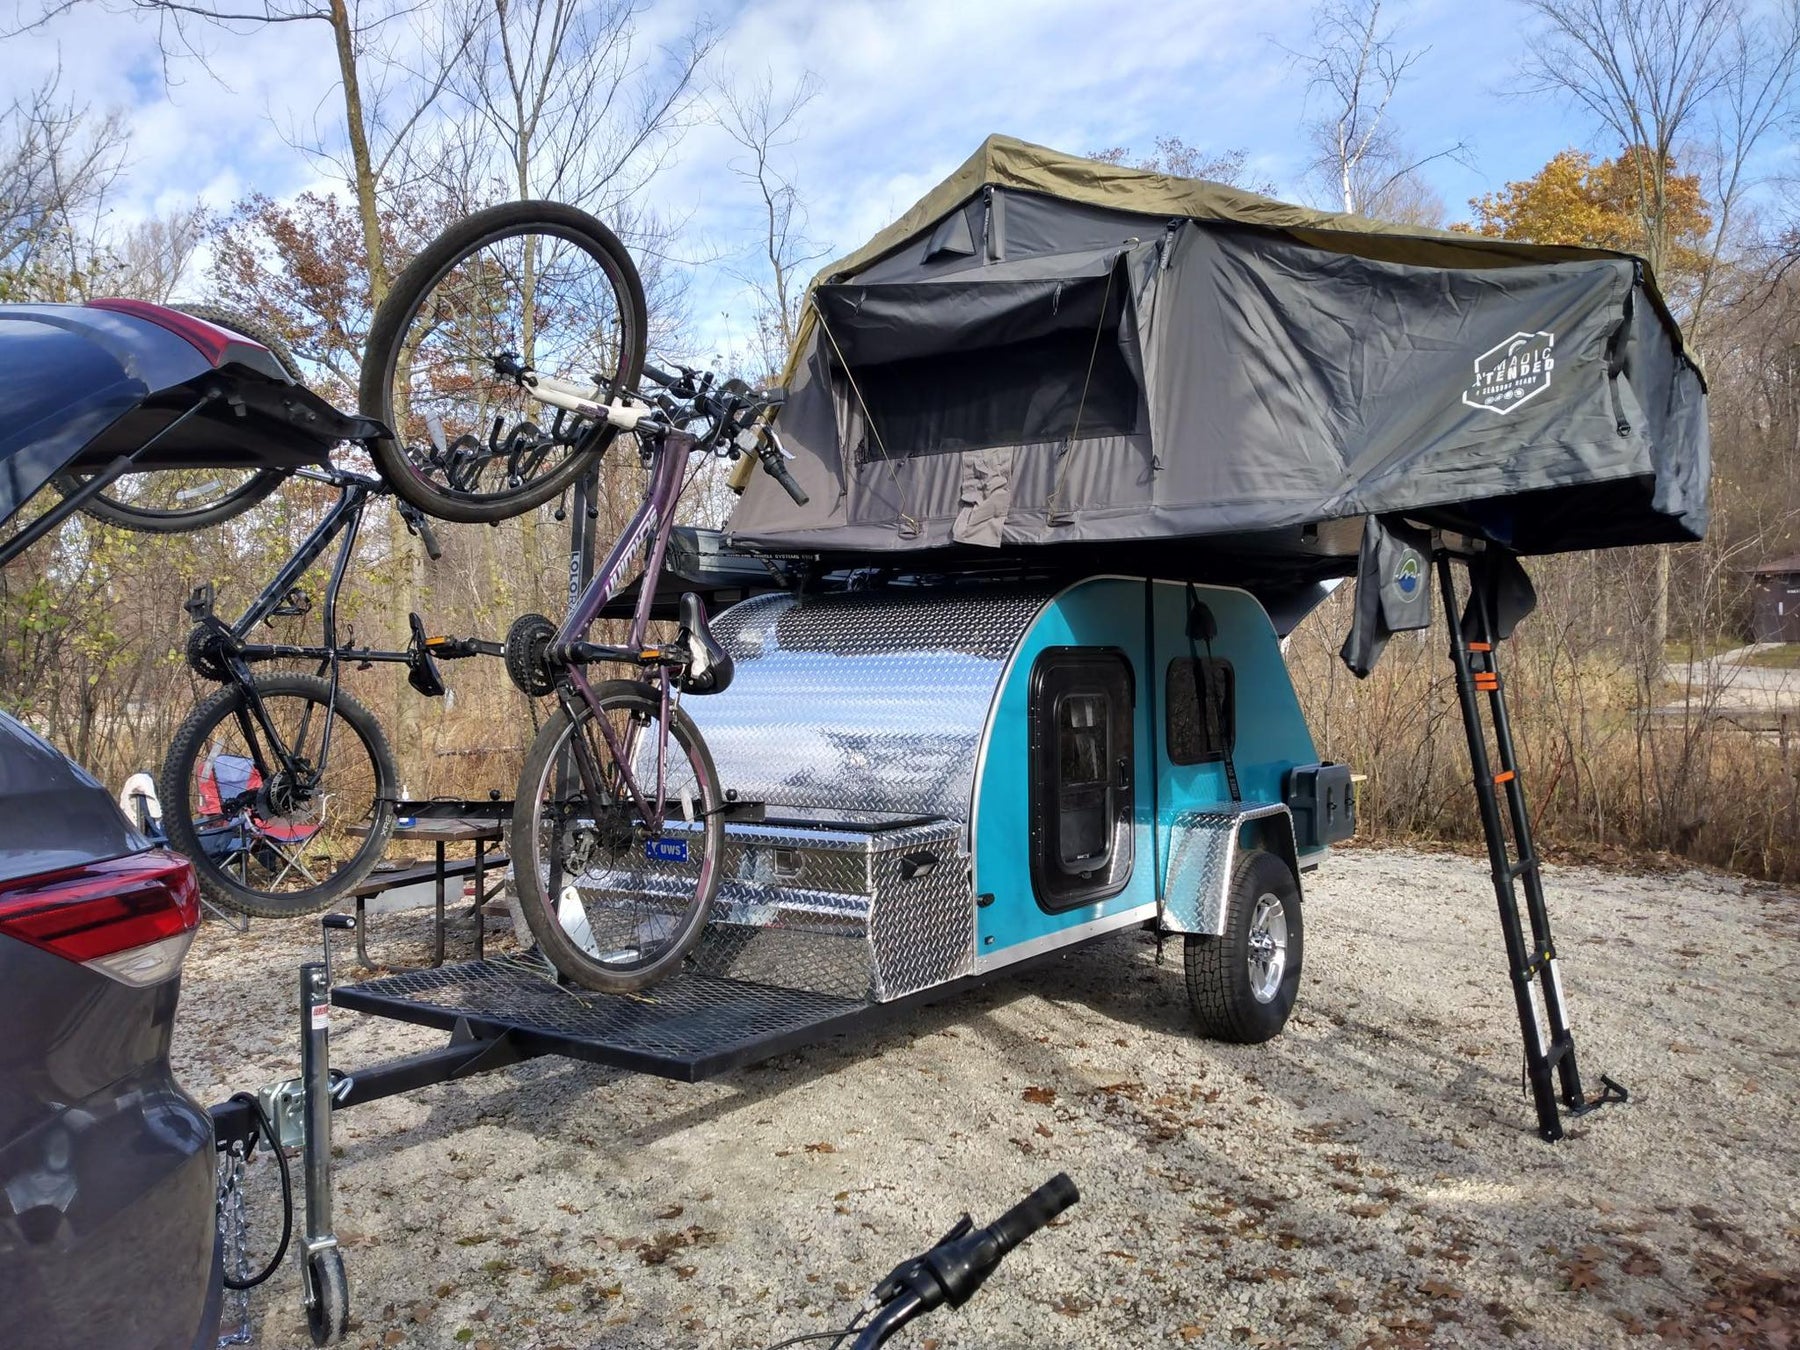 Featured YT Review: "Explore on a Budget: 6 Lightweight Trailers from TC Teardrops!" from Playing with Sticks